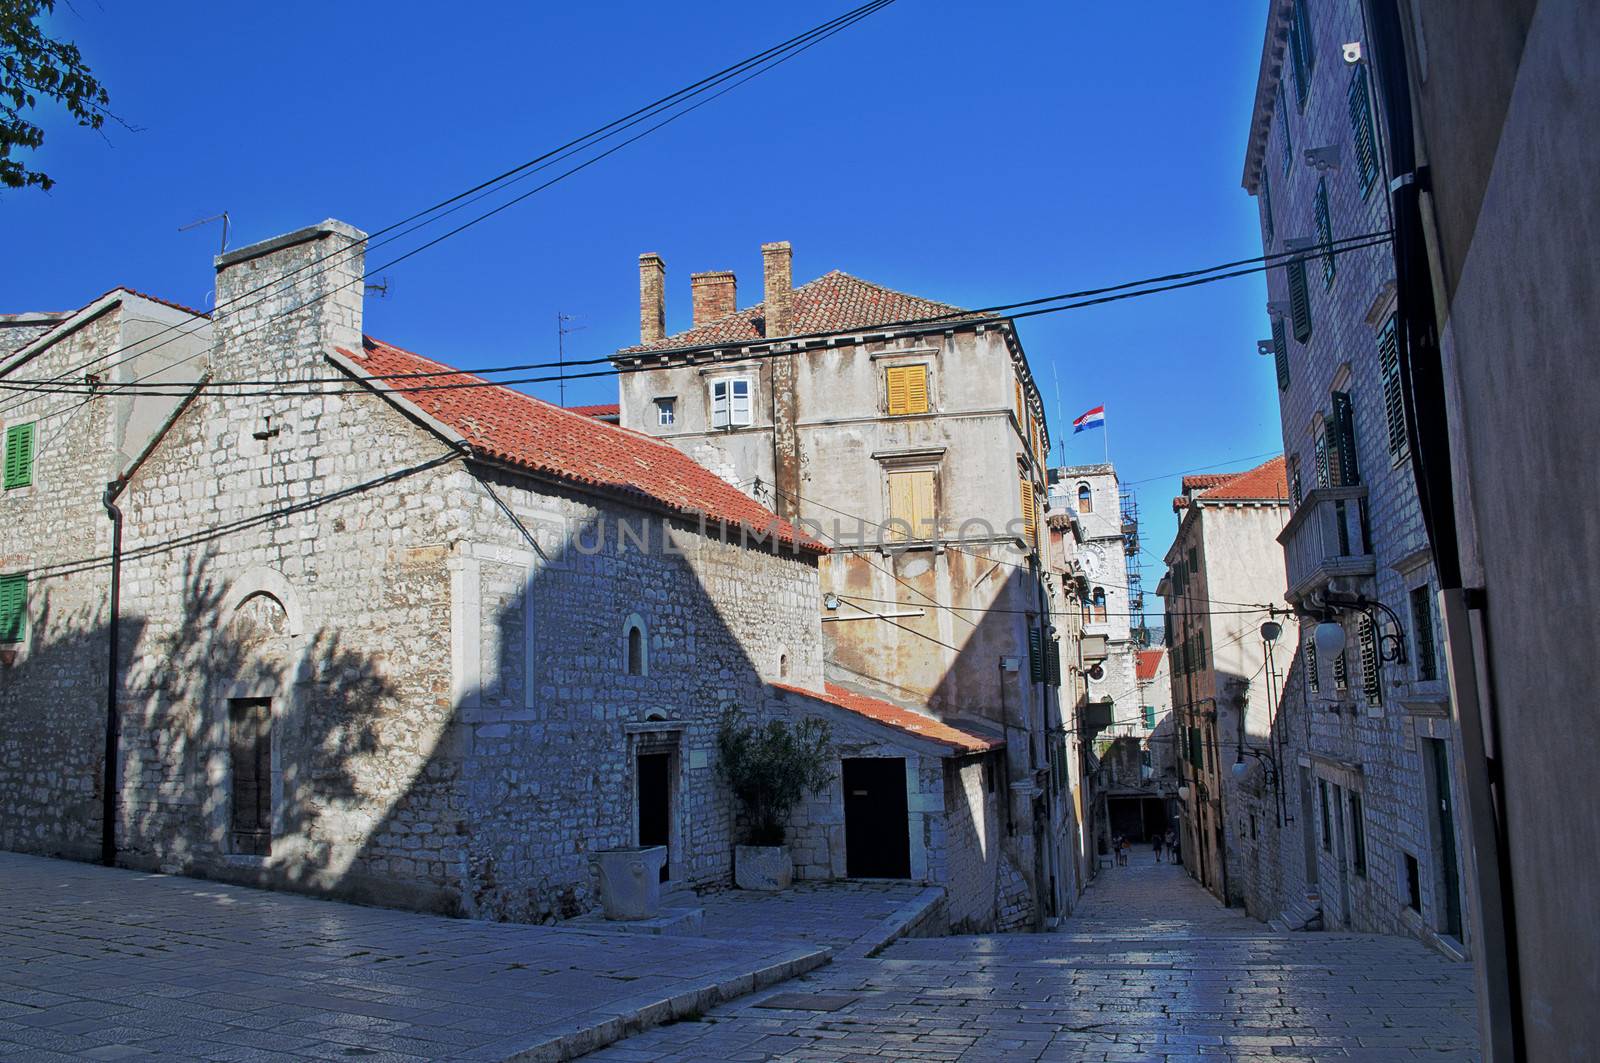 HDR view of an old stone square in Sibenik, Croatia